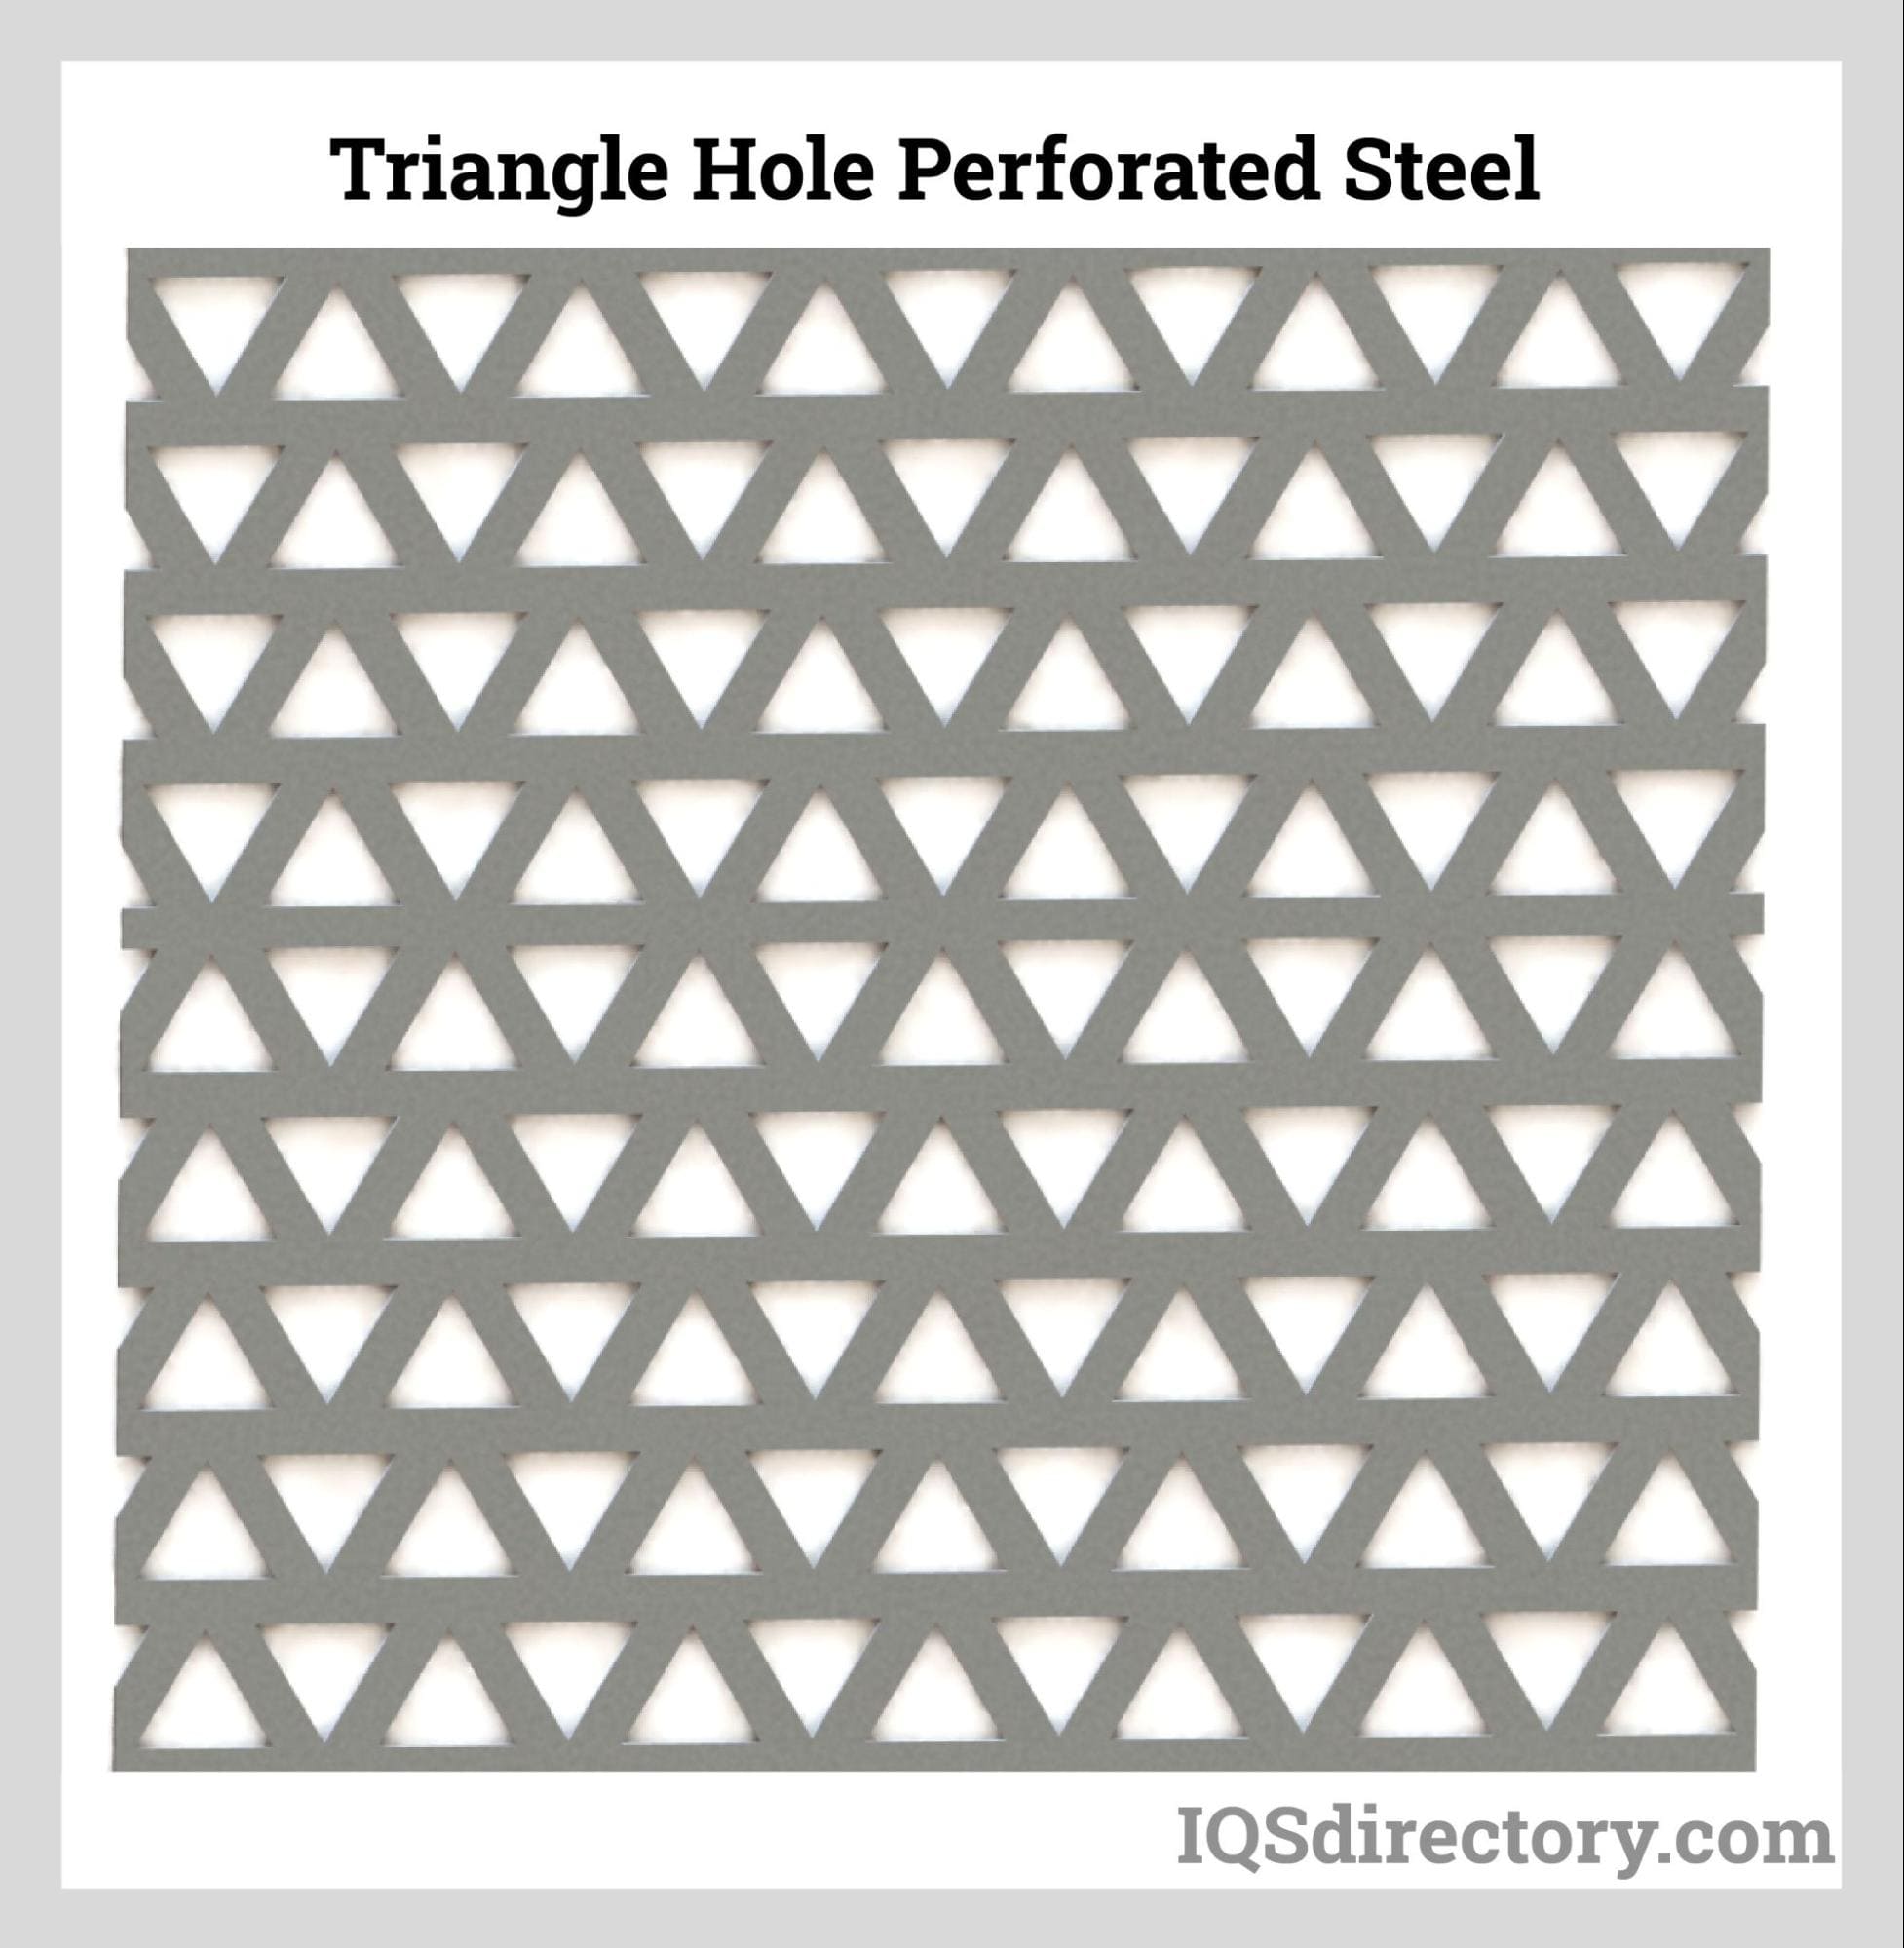 Triangle Hole Perforated Steel